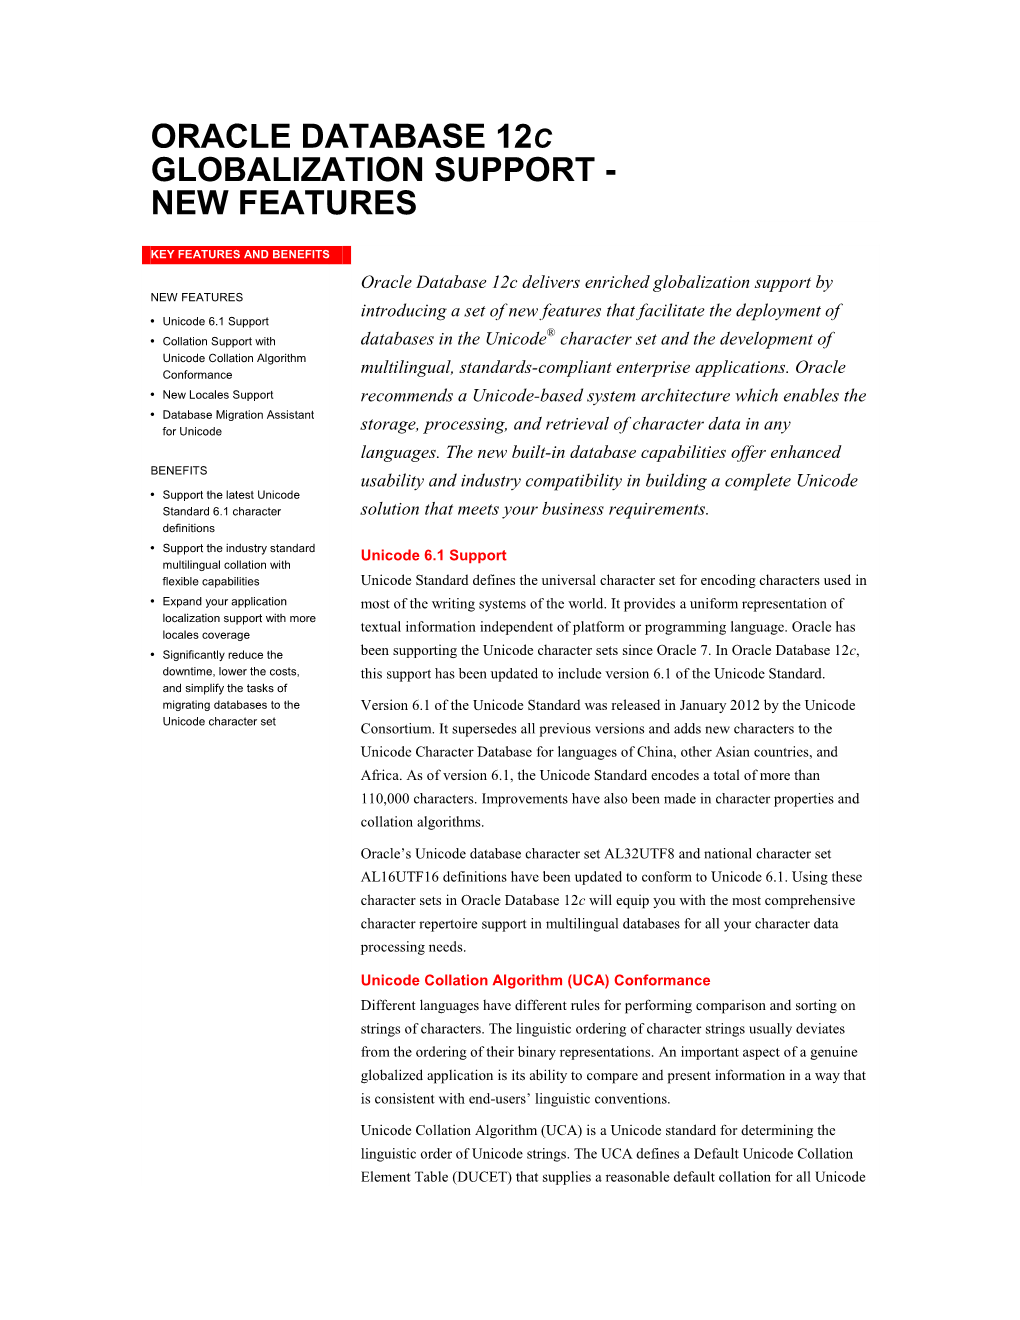 Oracle Database 12C Globalization Support - New Features